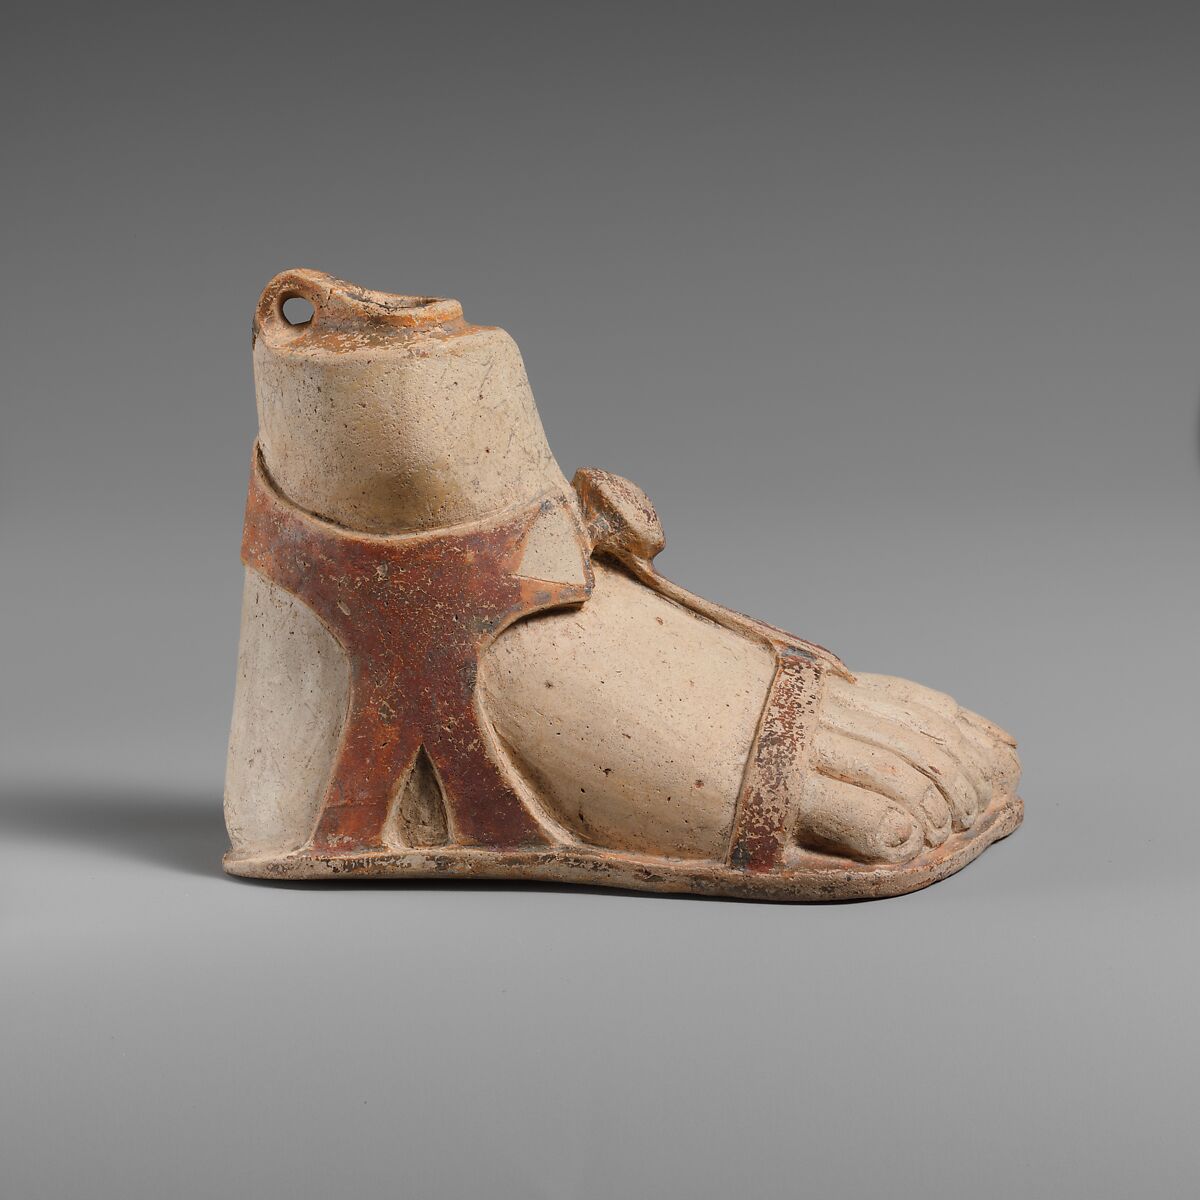 Terracotta aryballos (perfume vase) in the form of a sandaled right foot, Terracotta, Rhodian